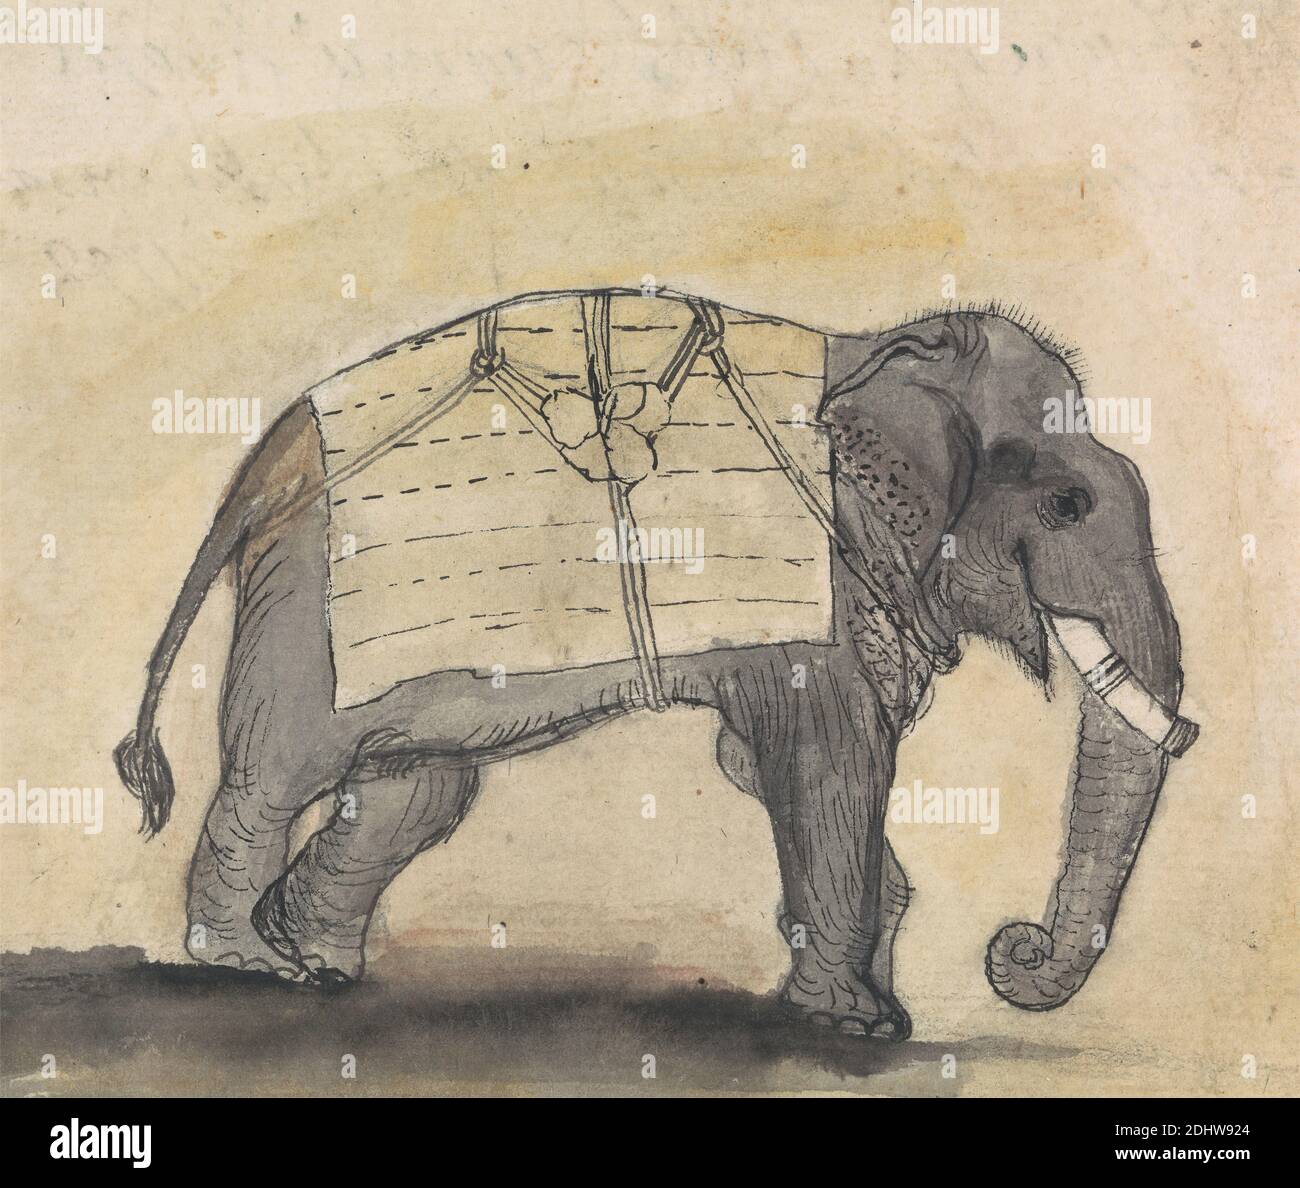 Elephant, Gangaram Chintaman Tambat, active 1790s, Anglo-Indian, undated, Watercolor and graphite with pen and black ink on medium, slightly textured, cream laid paper, Sheet: 5 3/4 × 7 inches (14.6 × 17.8 cm), animal art Stock Photo